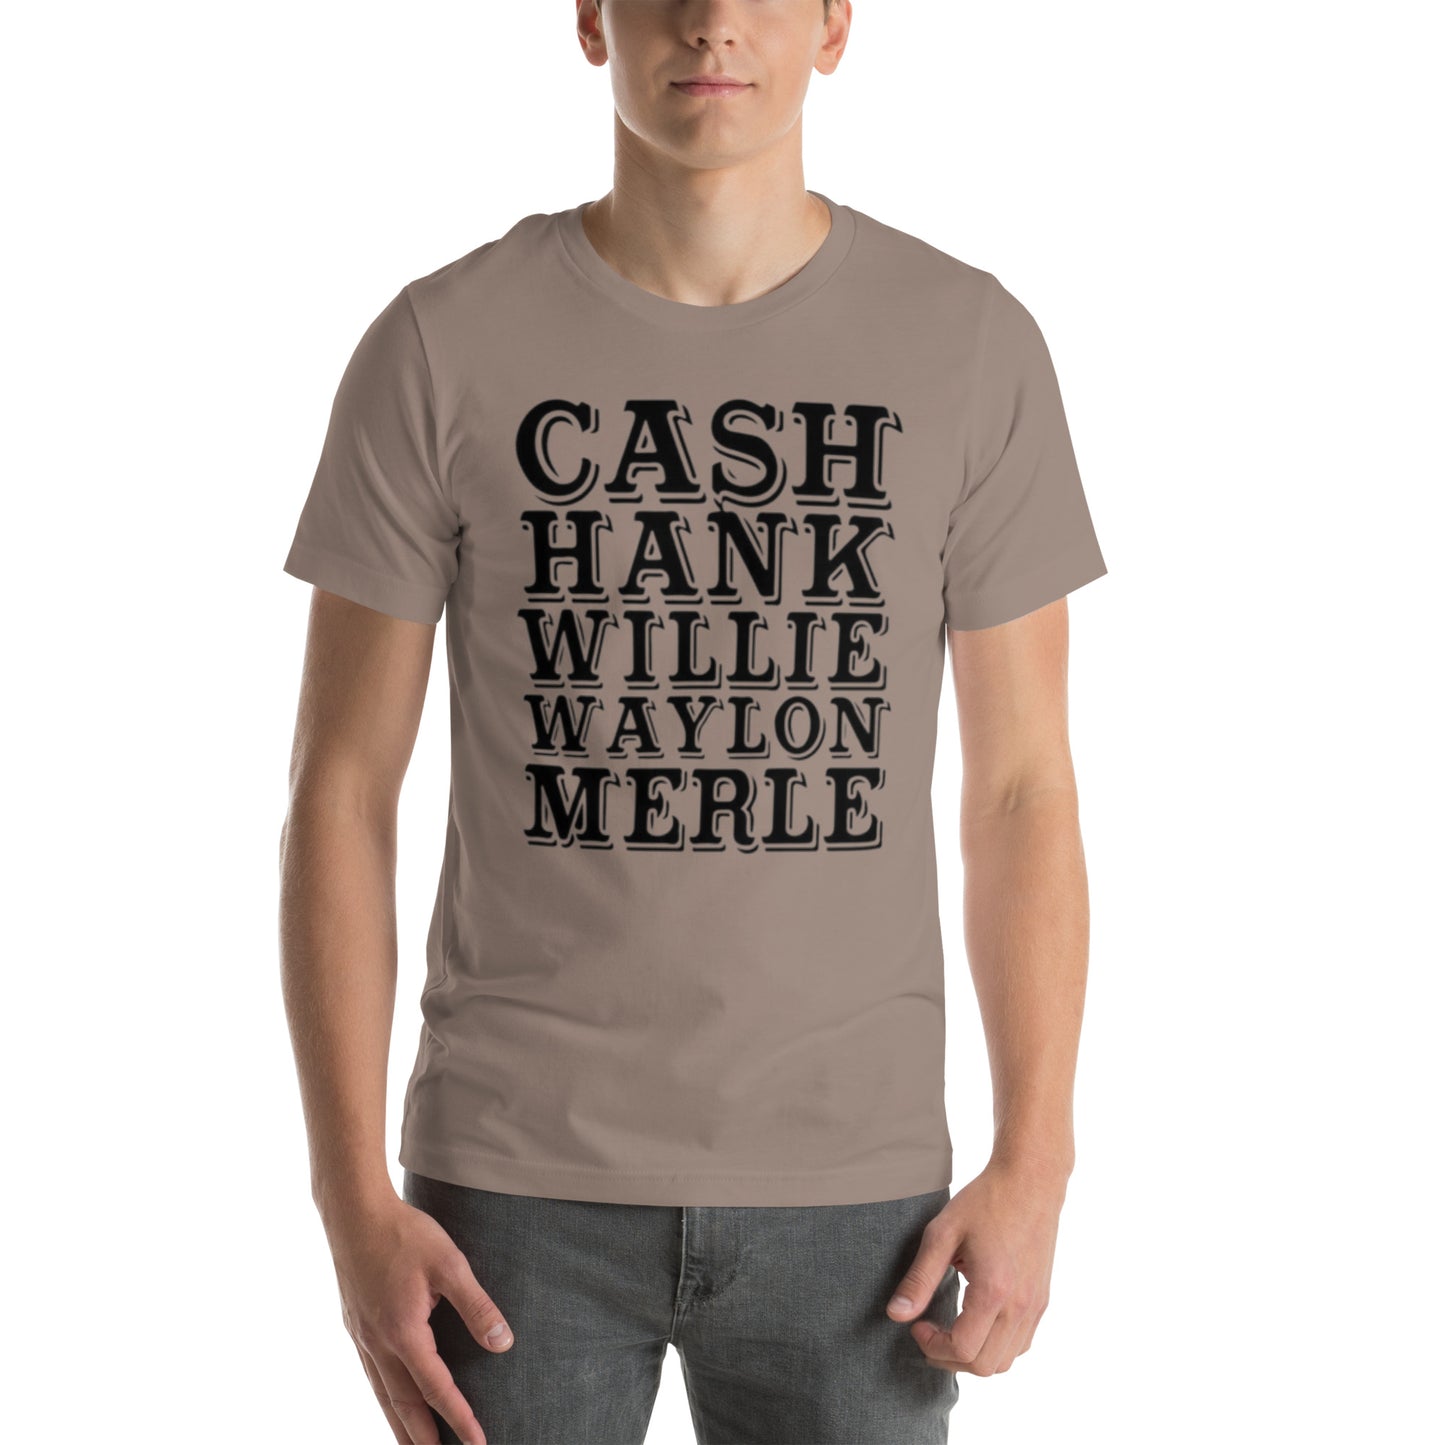 Cash Hank - Get Your Twang On with Classic Country Tees - The Ultimate Unisex T-Shirt for True Country Souls! - Classic Country Tees